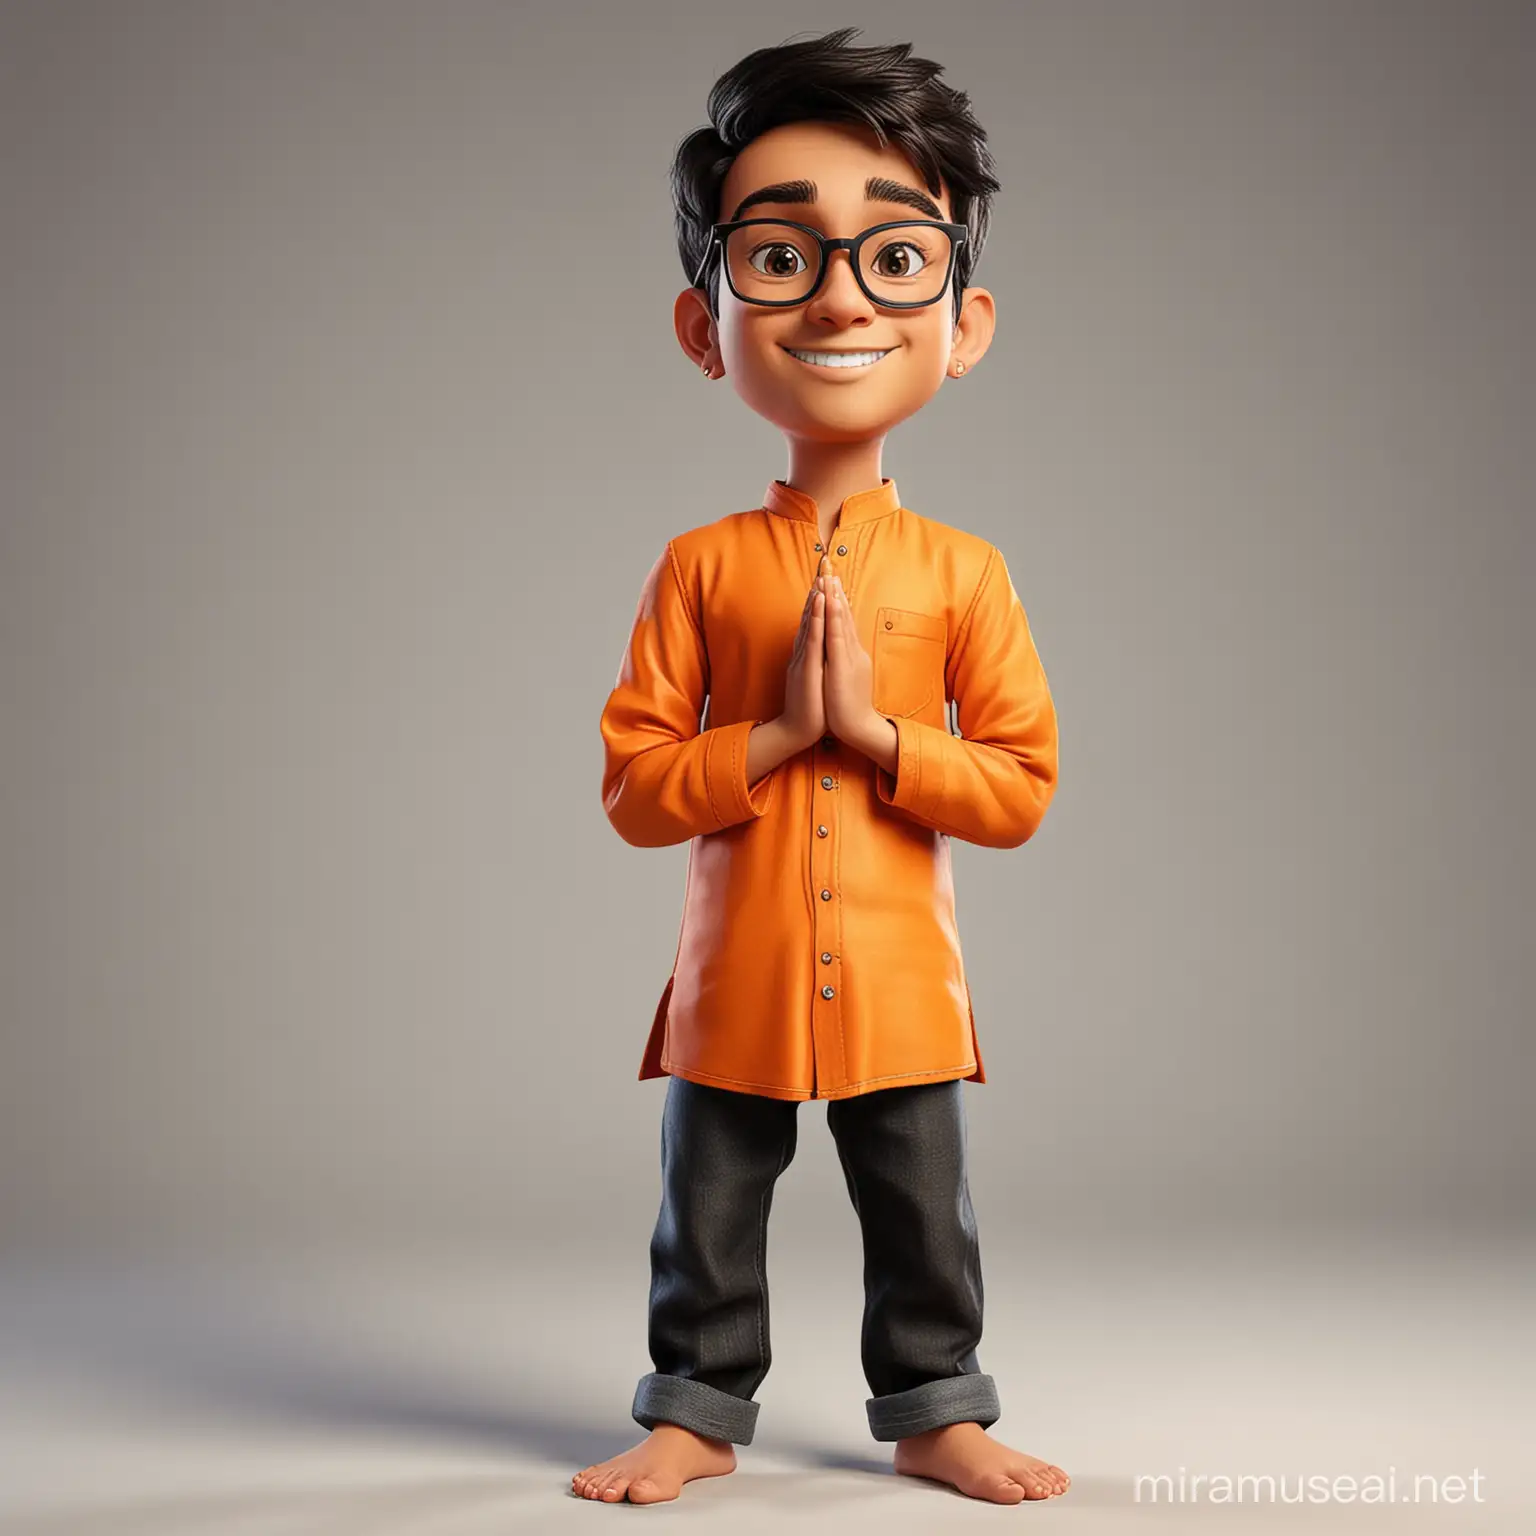 Teenage Boy Caricature Standing in Traditional Orange Kurta and Black Jeans with Folded Hands